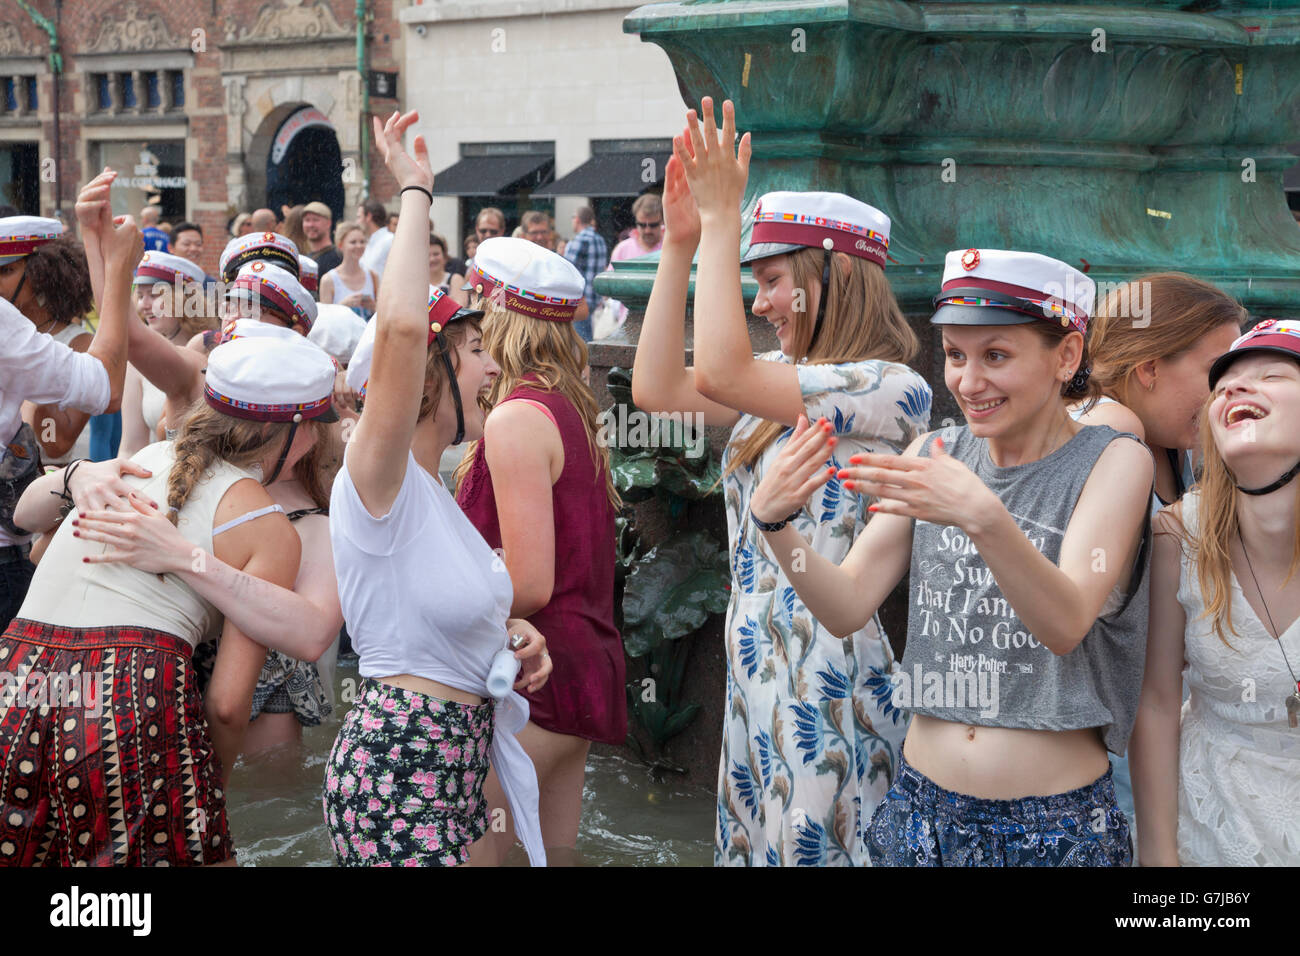 Danish students celebrate their high school, grammar school, graduation with the traditional dip in the Stork Fountain on Stroeget in Copenhagen. Stock Photo